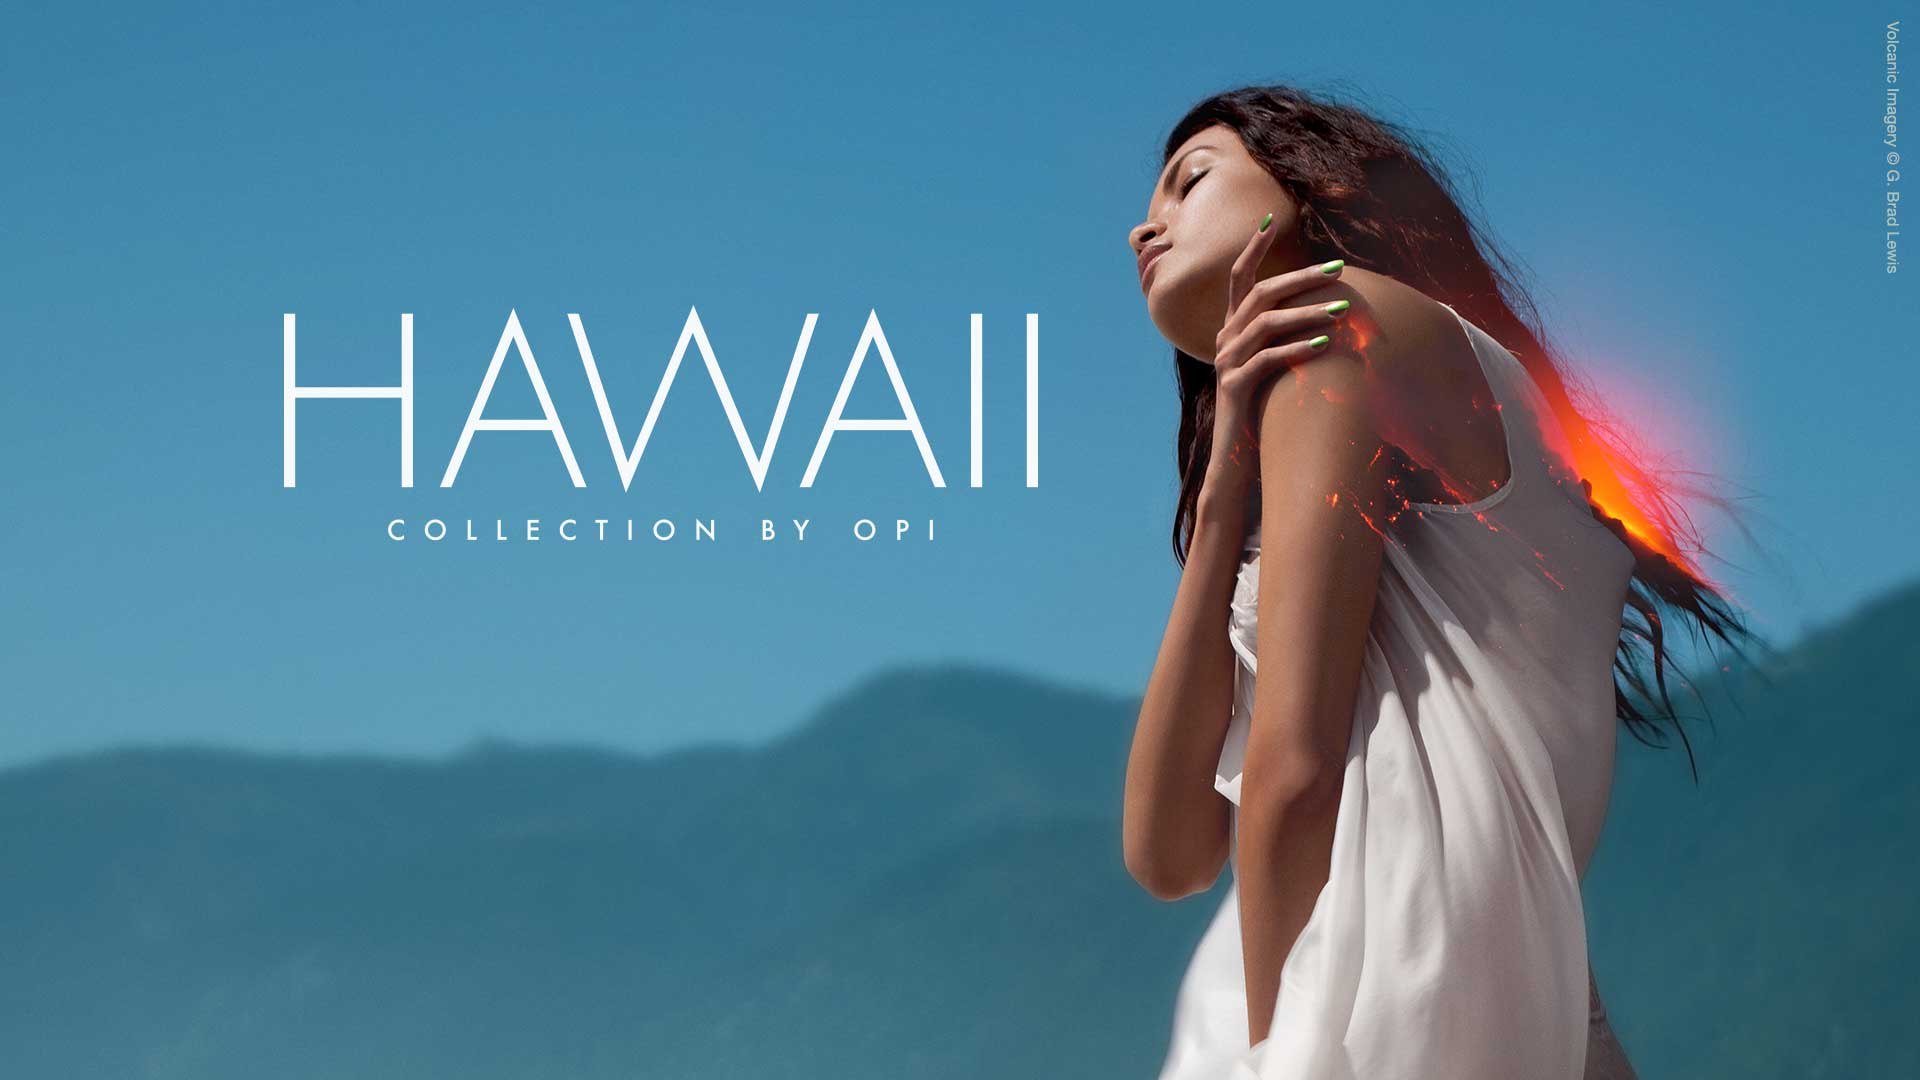 http://opi.com/sites/default/files/hawaii-collection-gallery-00003.jpg